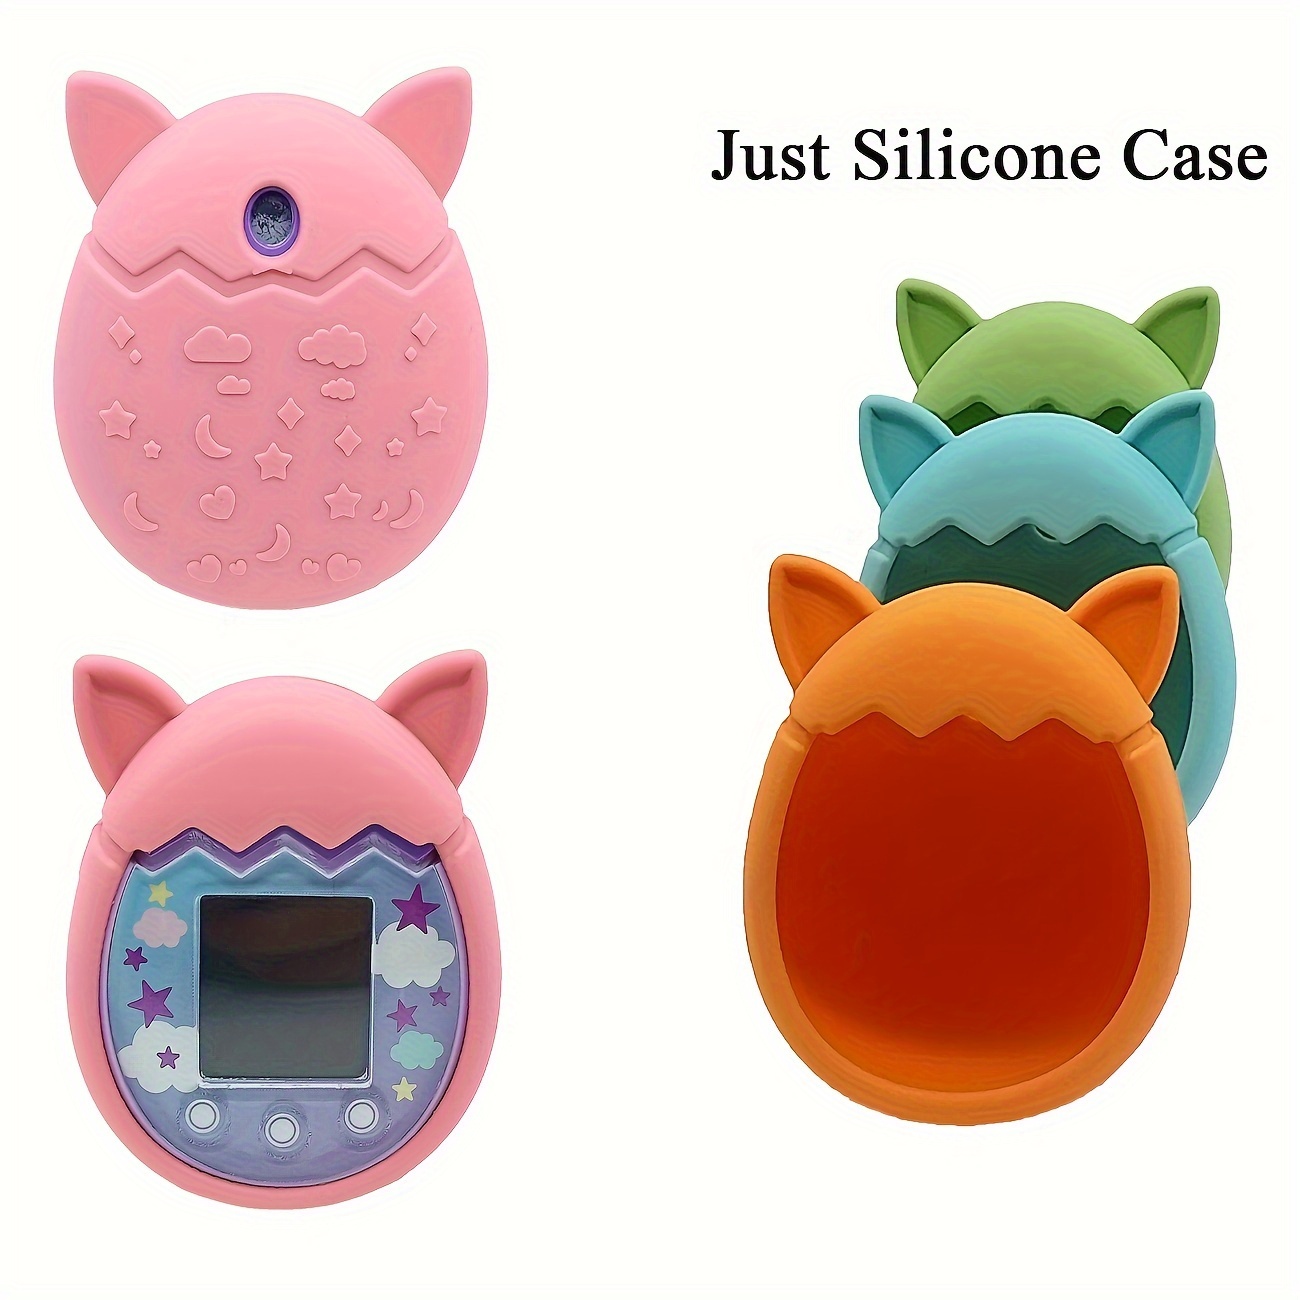 Silicone Protective Case for Bitzee Interactive Toy Digital Pet Cover  Vitural Game Accessories with Lanyard Shockproof Shell